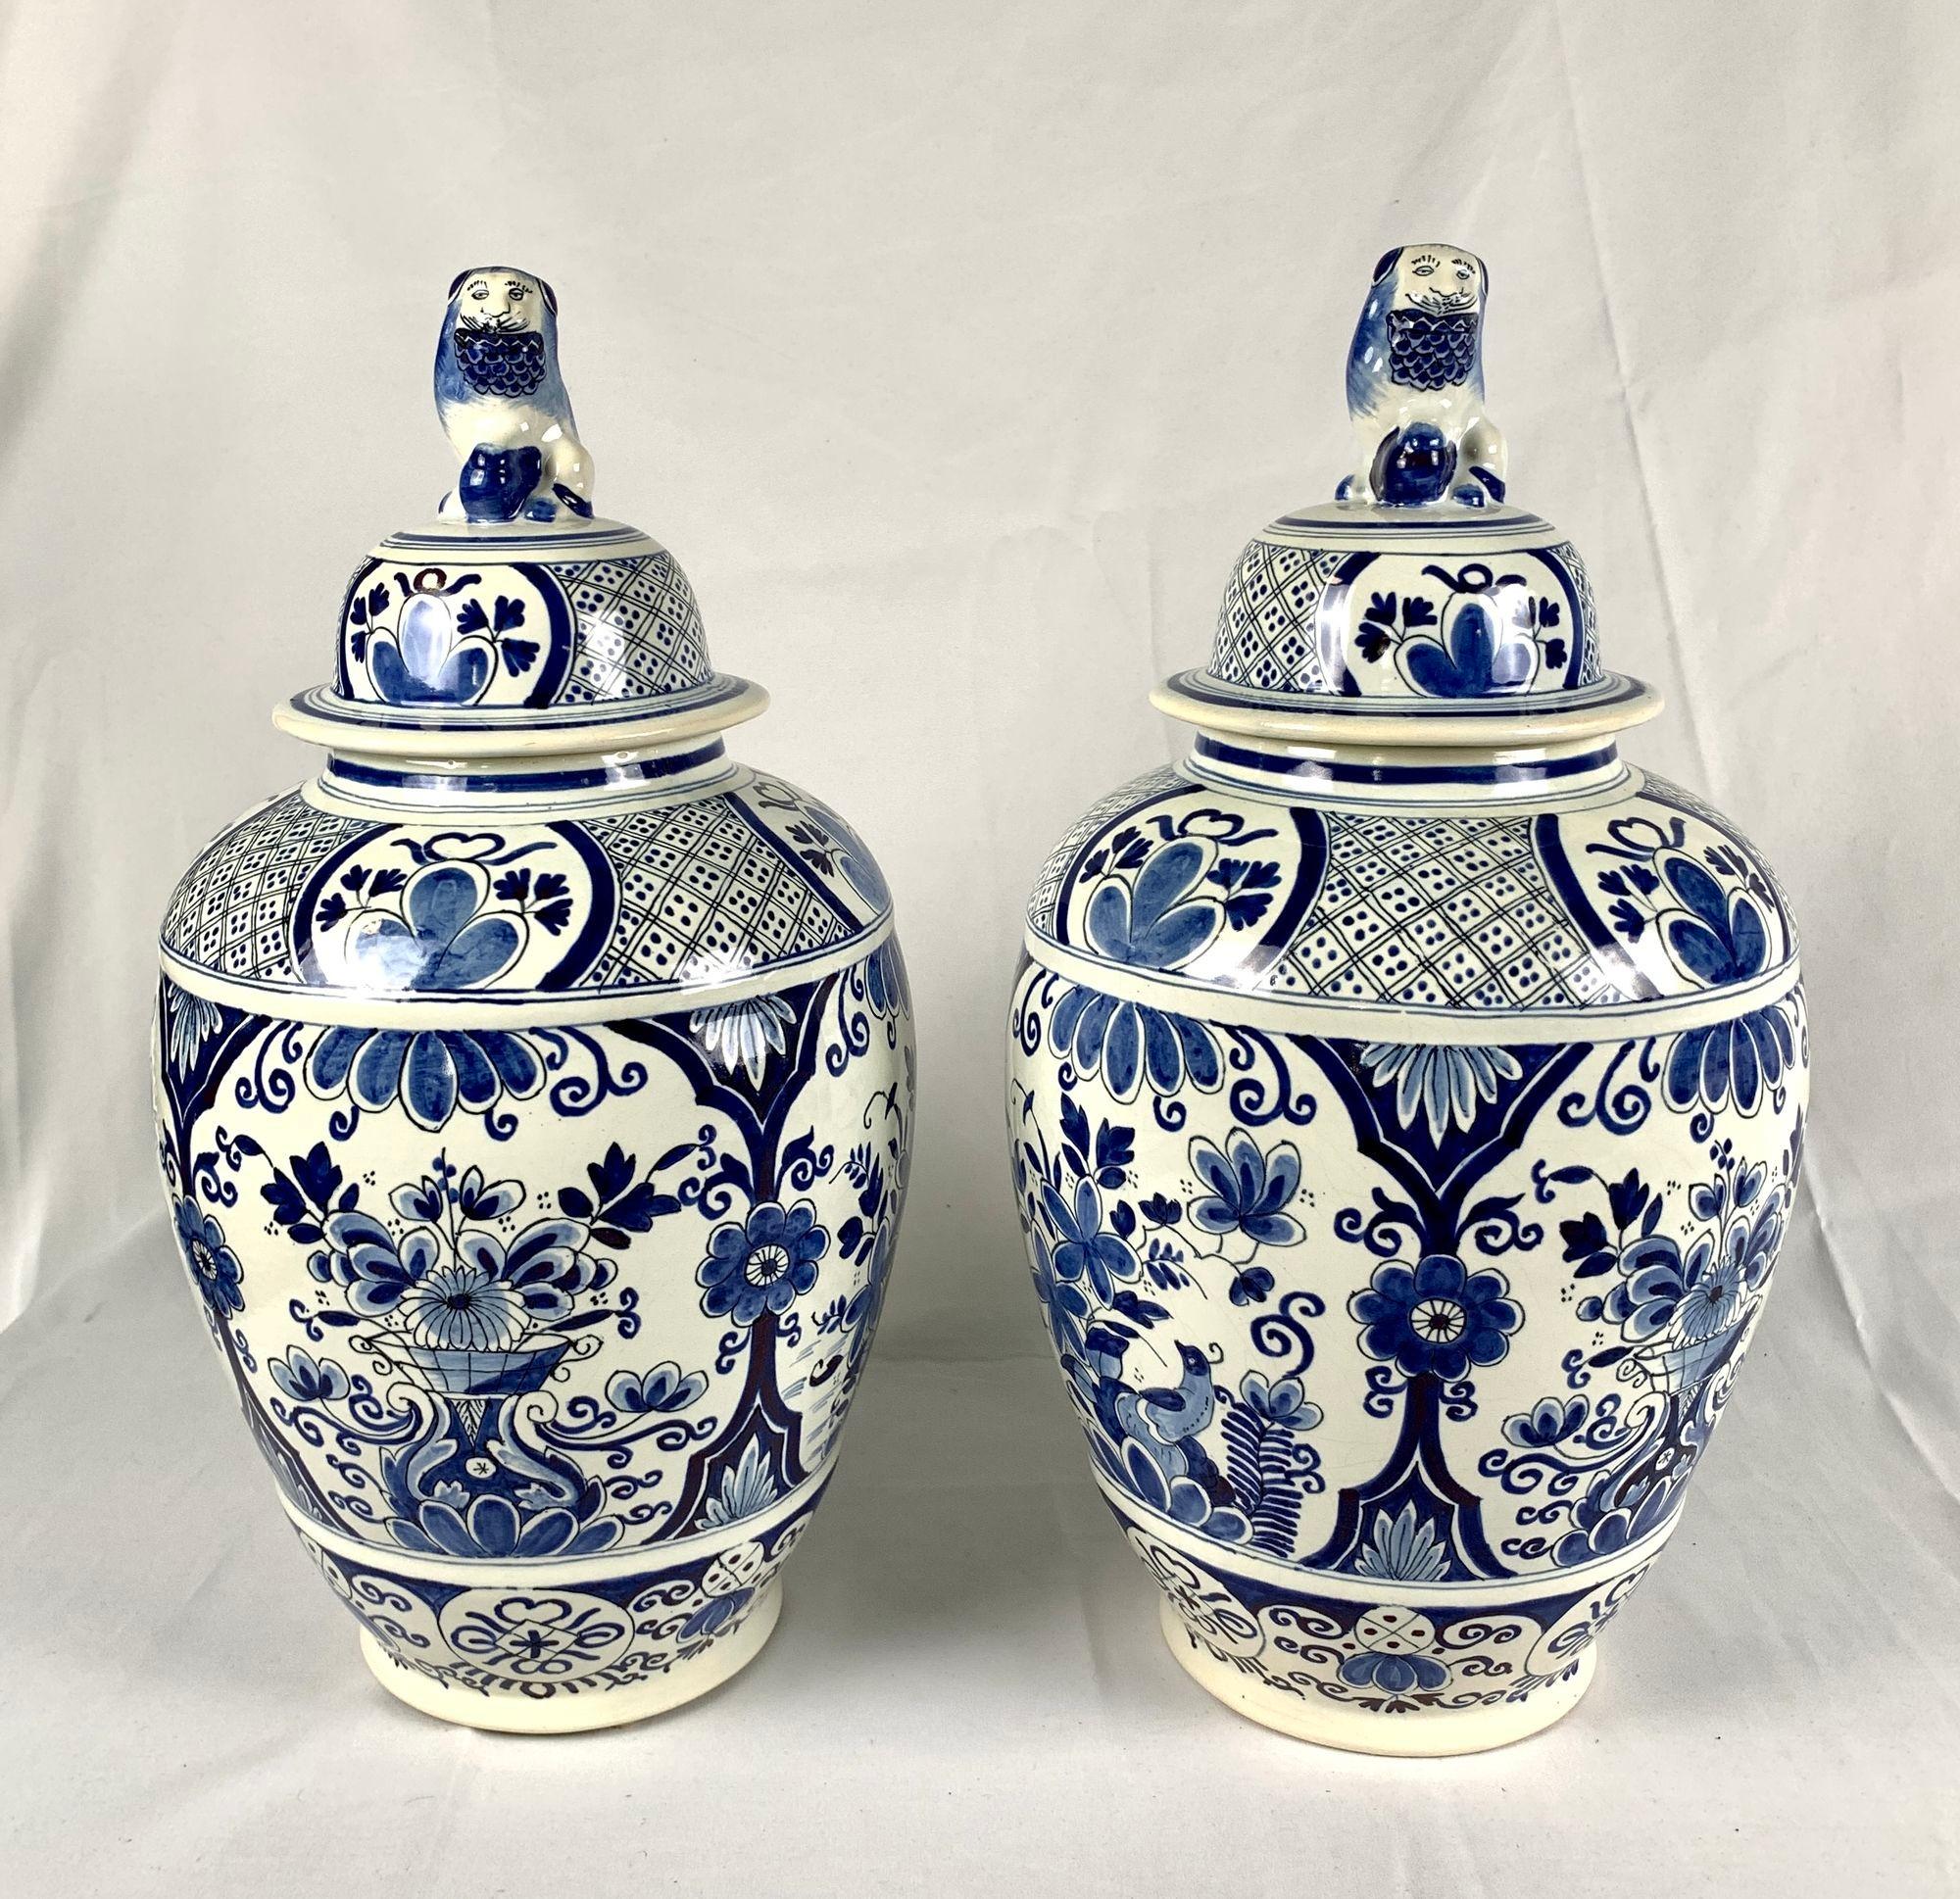 This pair of large Delft jars has a traditional blue and white floral decoration painted on a white tin-glazed ground.
The body of each jar features four large panels; two show a peacock among flowers, and two show a vase overflowing with